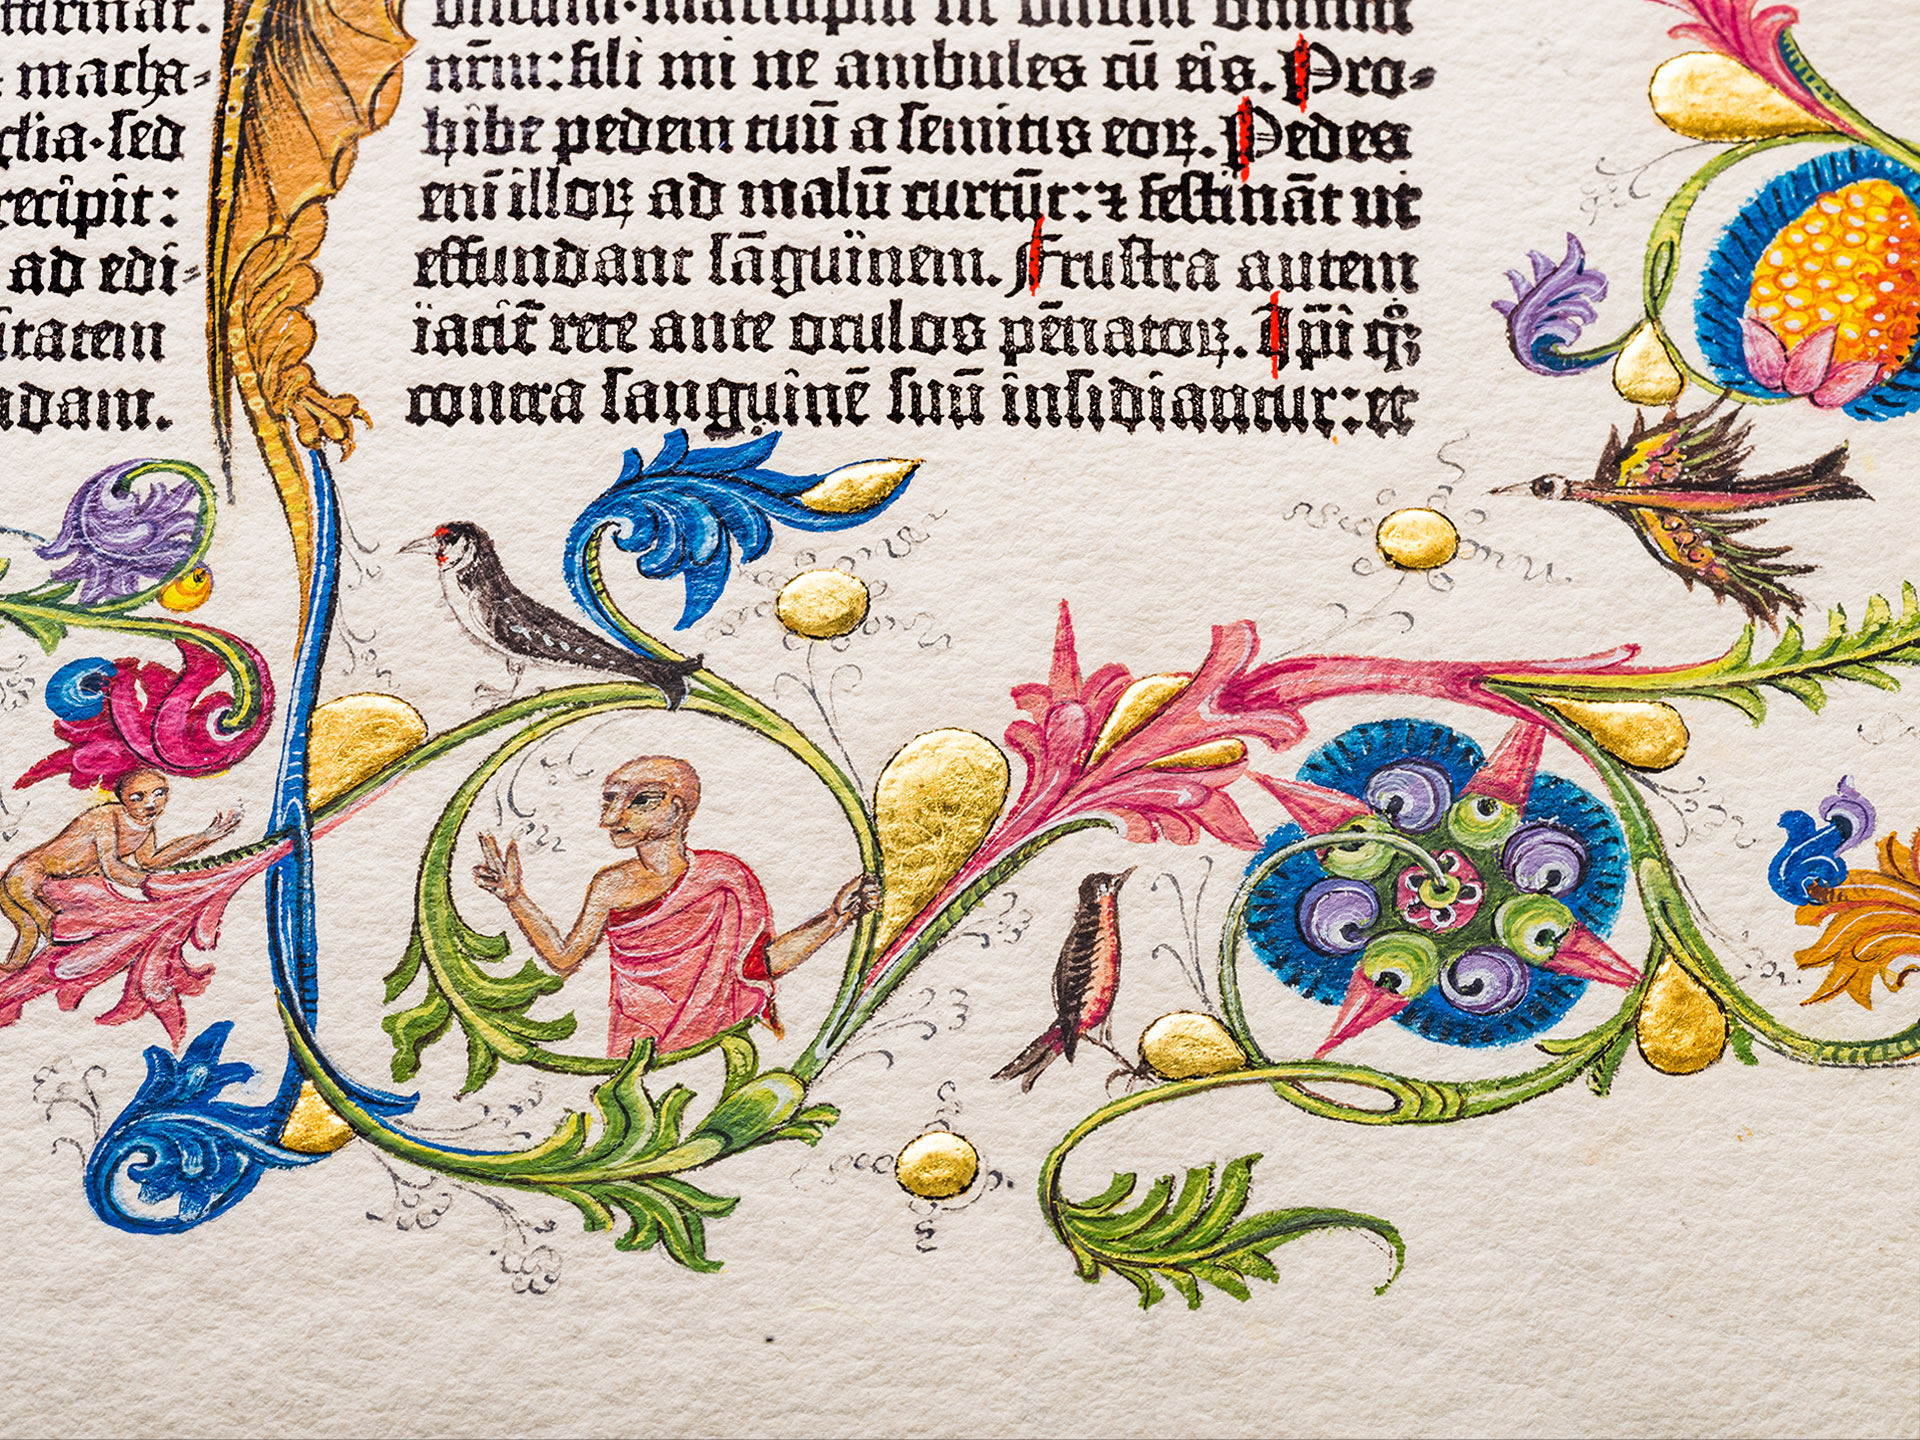 The Book of Proverbs. Ornamental page from the Gutenberg Bible